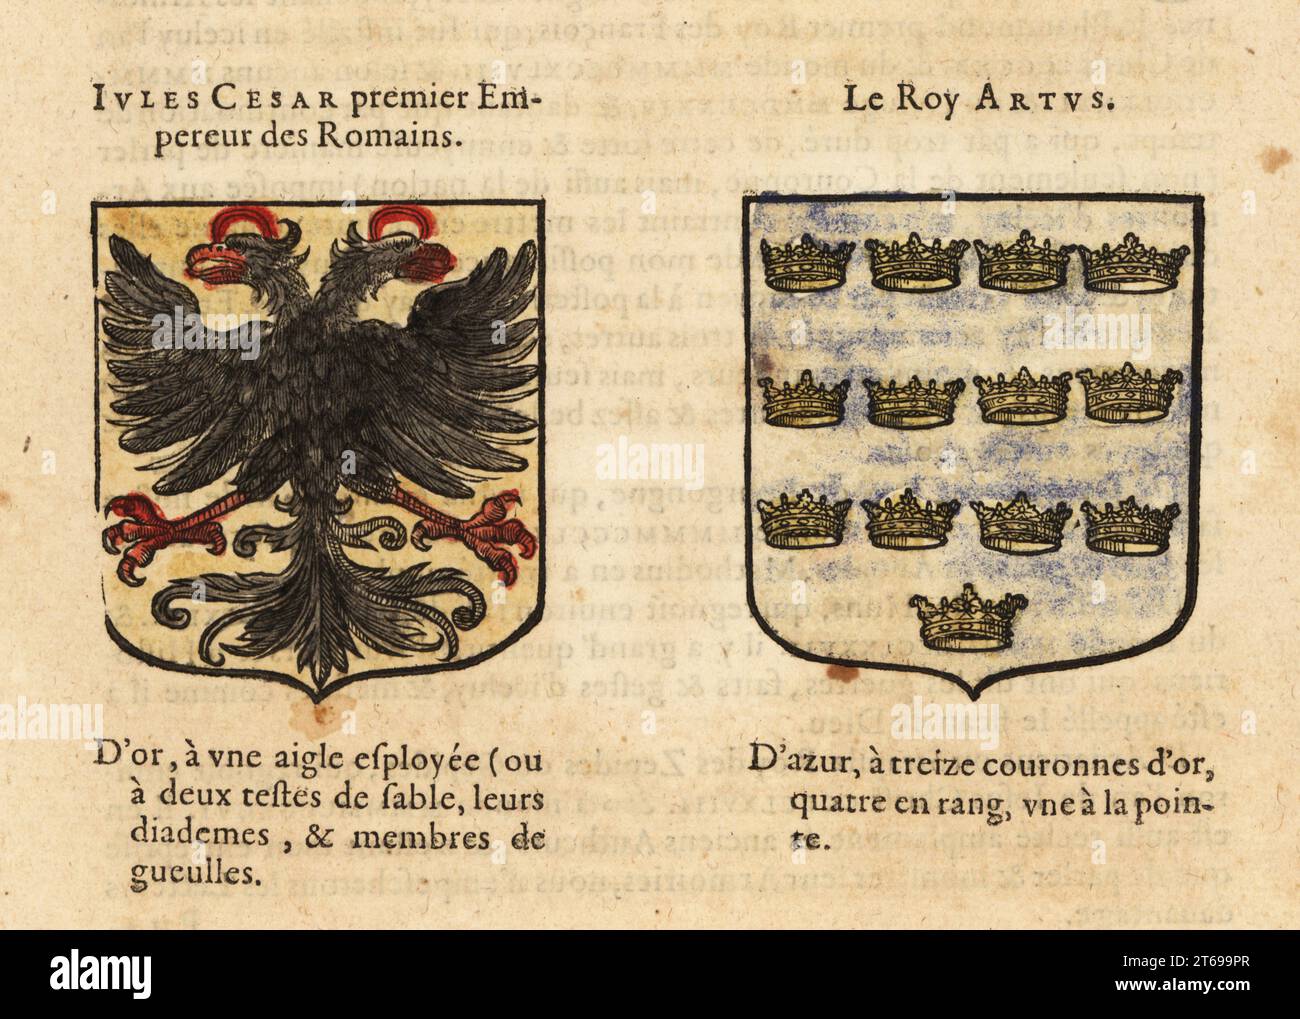 Imaginary coats of arms of the Nine Worthies: Gaius Julius Caesar, Emperor of Rome, with two-headed eagle, and King Arthur, with 13 gold crowns. JULES CESAR, Le Roy ARTUS. Handcoloured woodblock engraving from Hierosme de Baras Le Blason des Armoiries, Chez Rolet Boutonne, Paris, 1628. Stock Photo